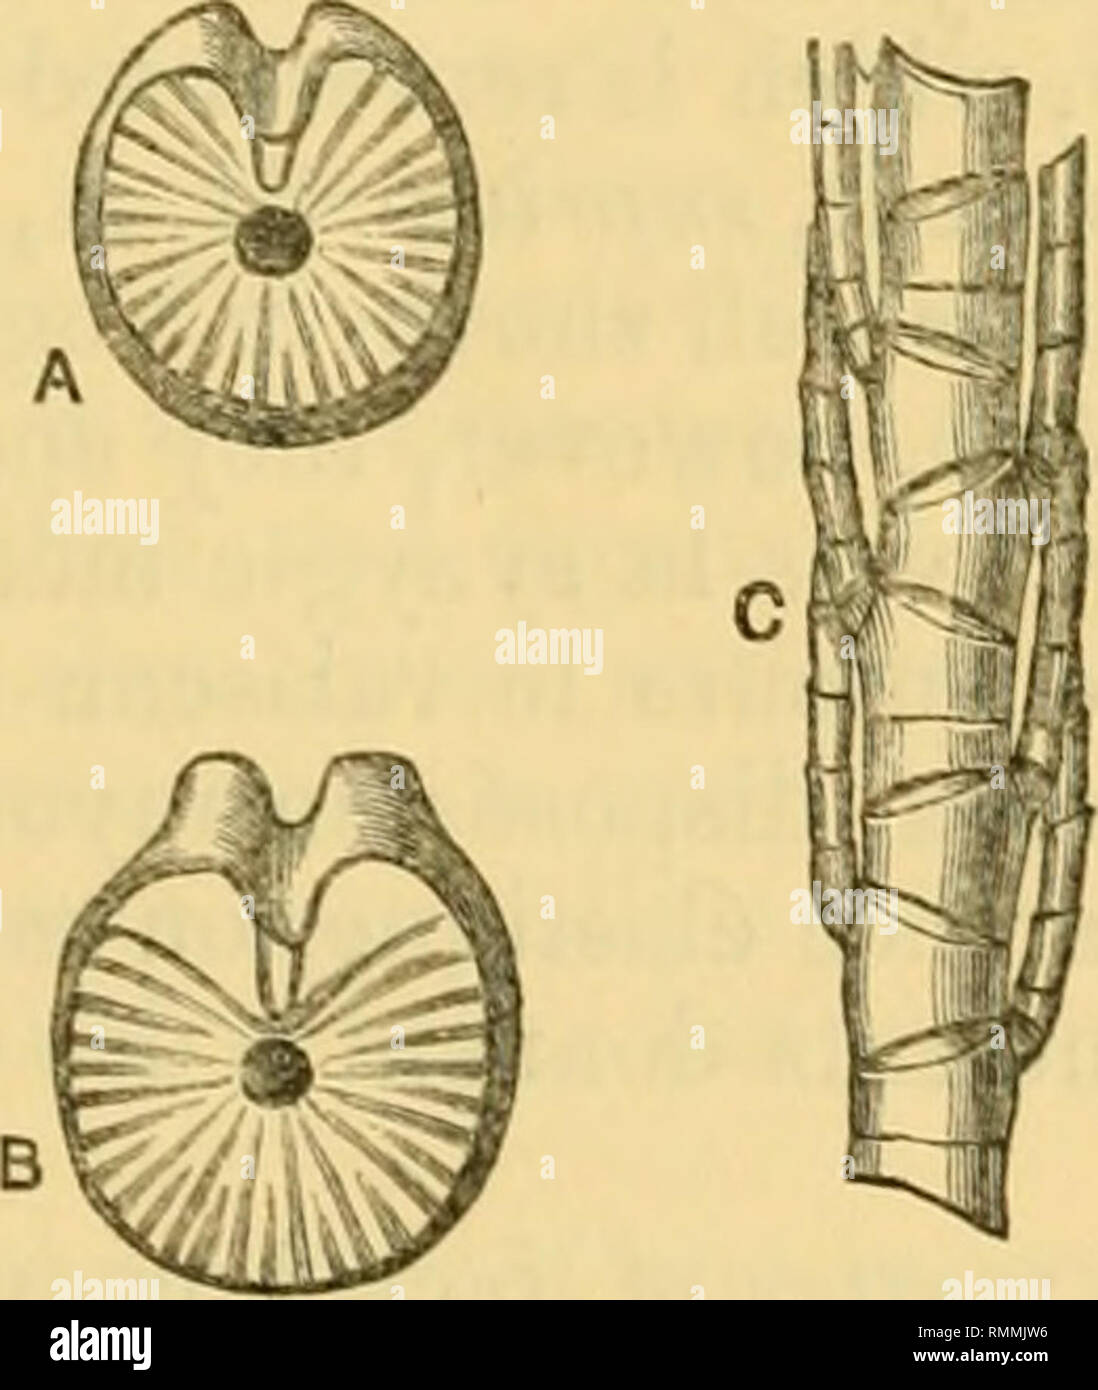 . The Annals and magazine of natural history; zoology, botany, and geology. Natural history; Zoology; Botany; Geology. Morphology o/Antedon rosacea. 37 space on the dorsal side of the central capsule which is marked /' in fig. 267, and c in fig. 276, and is described in the expla- nation of tlie former figure as one of these cavities of the cham- bered organ, is nothing wliatever but a rent in the organic basis of the floor of tlie centro-dorsal piece. These rents often appear in the skeletal tissues when very thin sections are cut, and I have been familiar with them for years; but I have many Stock Photo